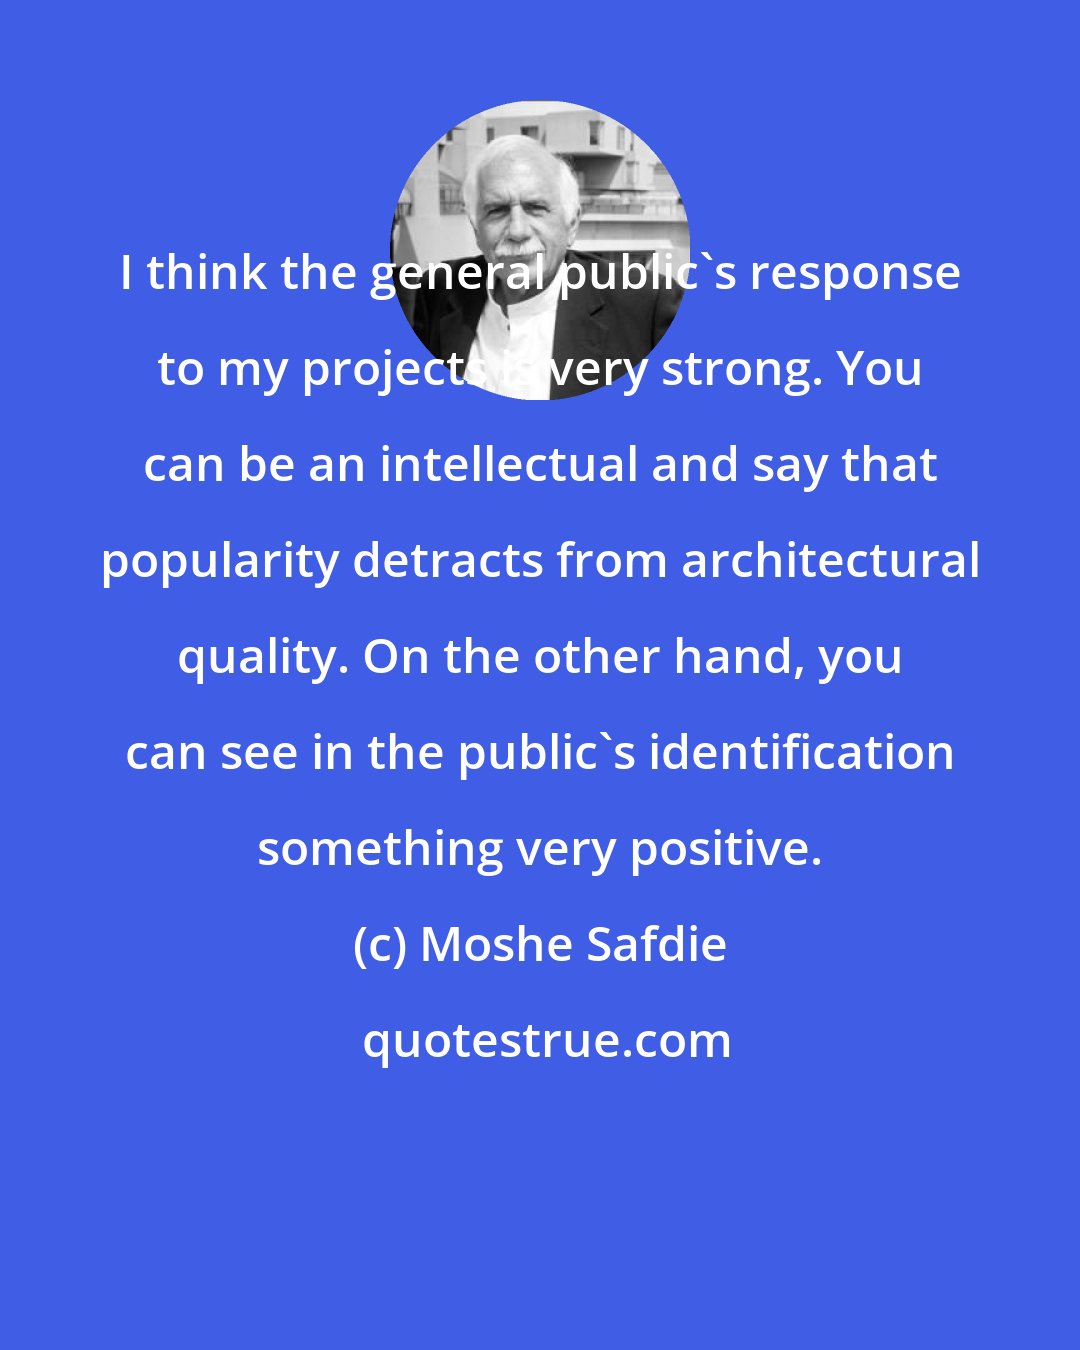 Moshe Safdie: I think the general public's response to my projects is very strong. You can be an intellectual and say that popularity detracts from architectural quality. On the other hand, you can see in the public's identification something very positive.